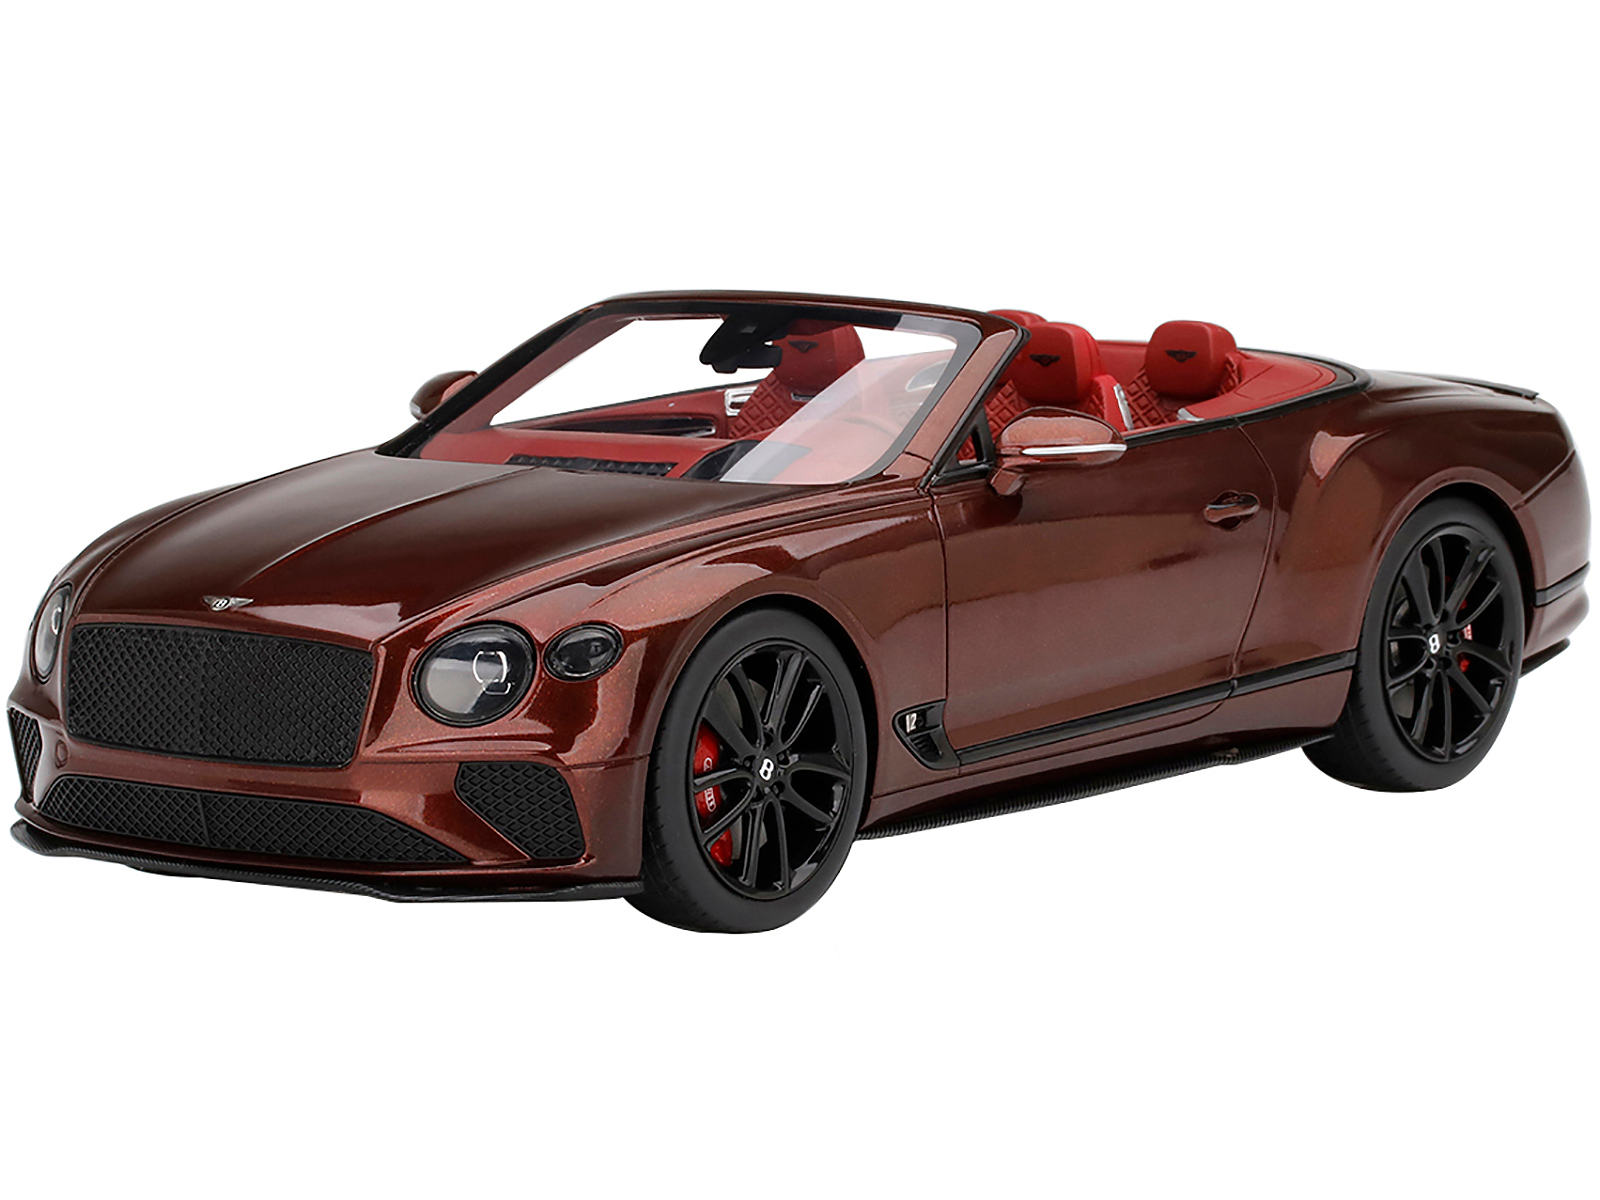 Bentley Continental GT Convertible Cricket Ball Red Metallic with Red Interior 1/18 Model Car by Top Speed